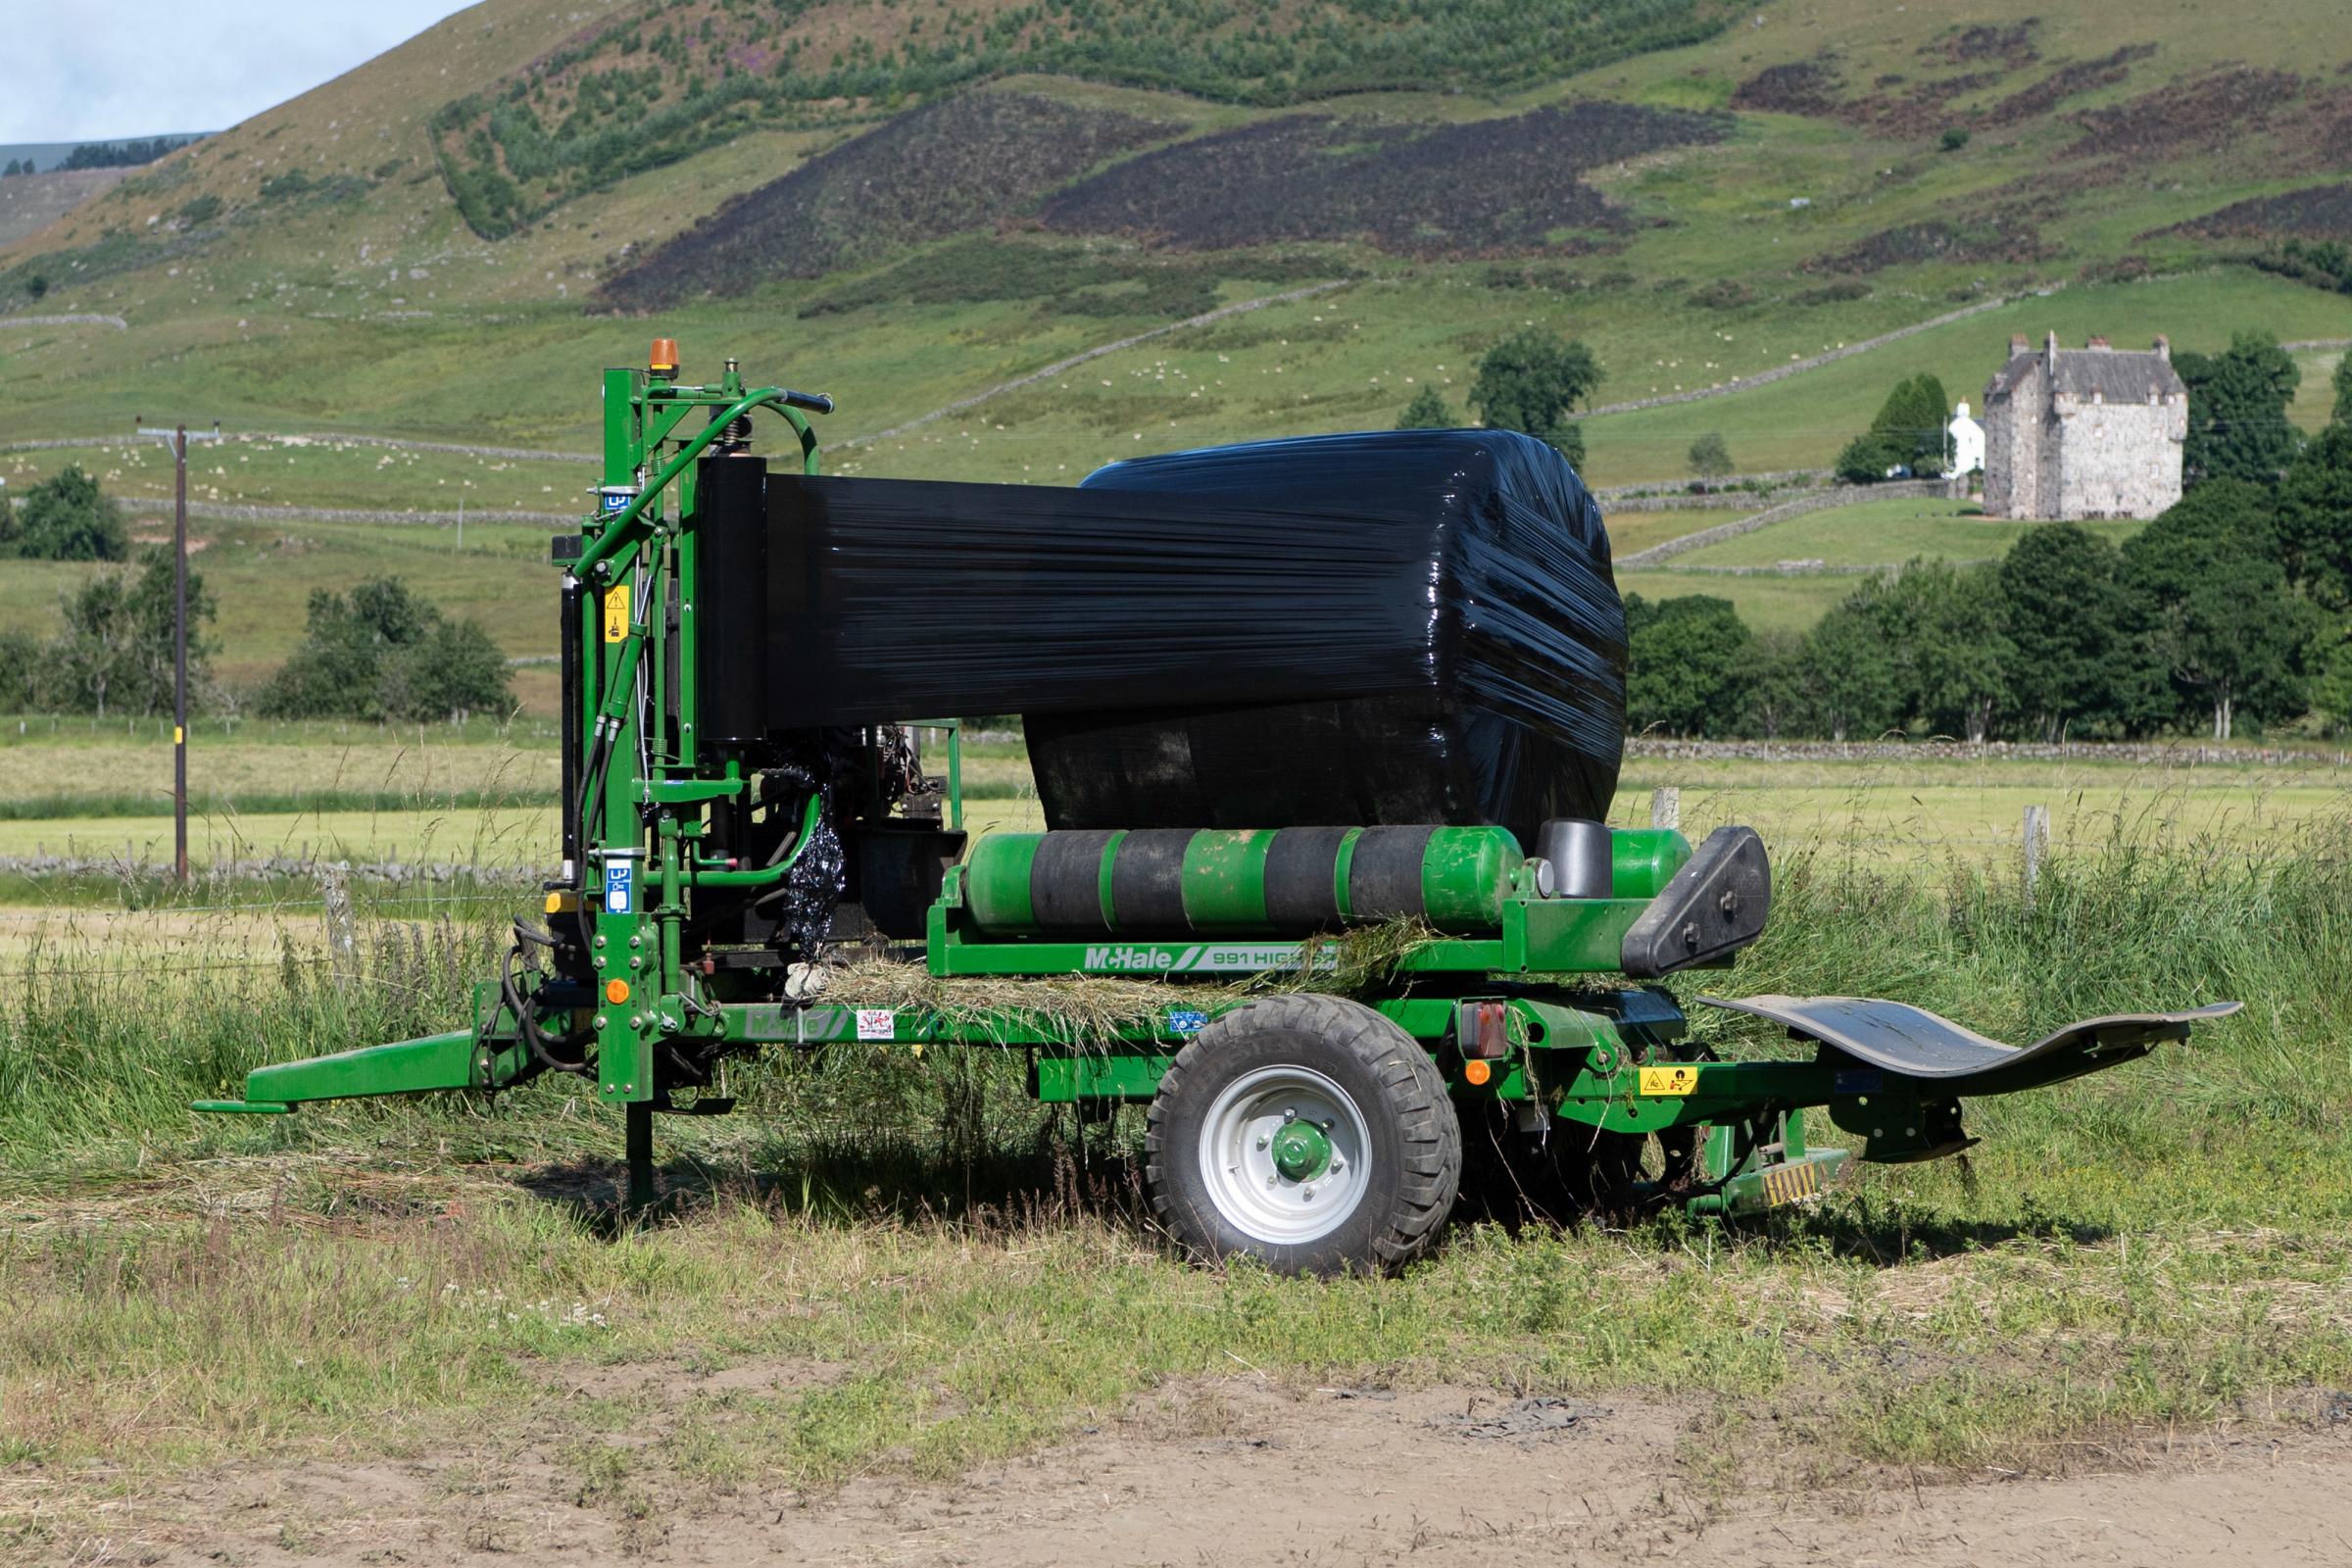 McHale 991 high speed bale wrapper is used by N and R Constable for the efficient and effective round bale wrapping it does Ref:RH170721063 Rob Haining / The Scottish Farmer